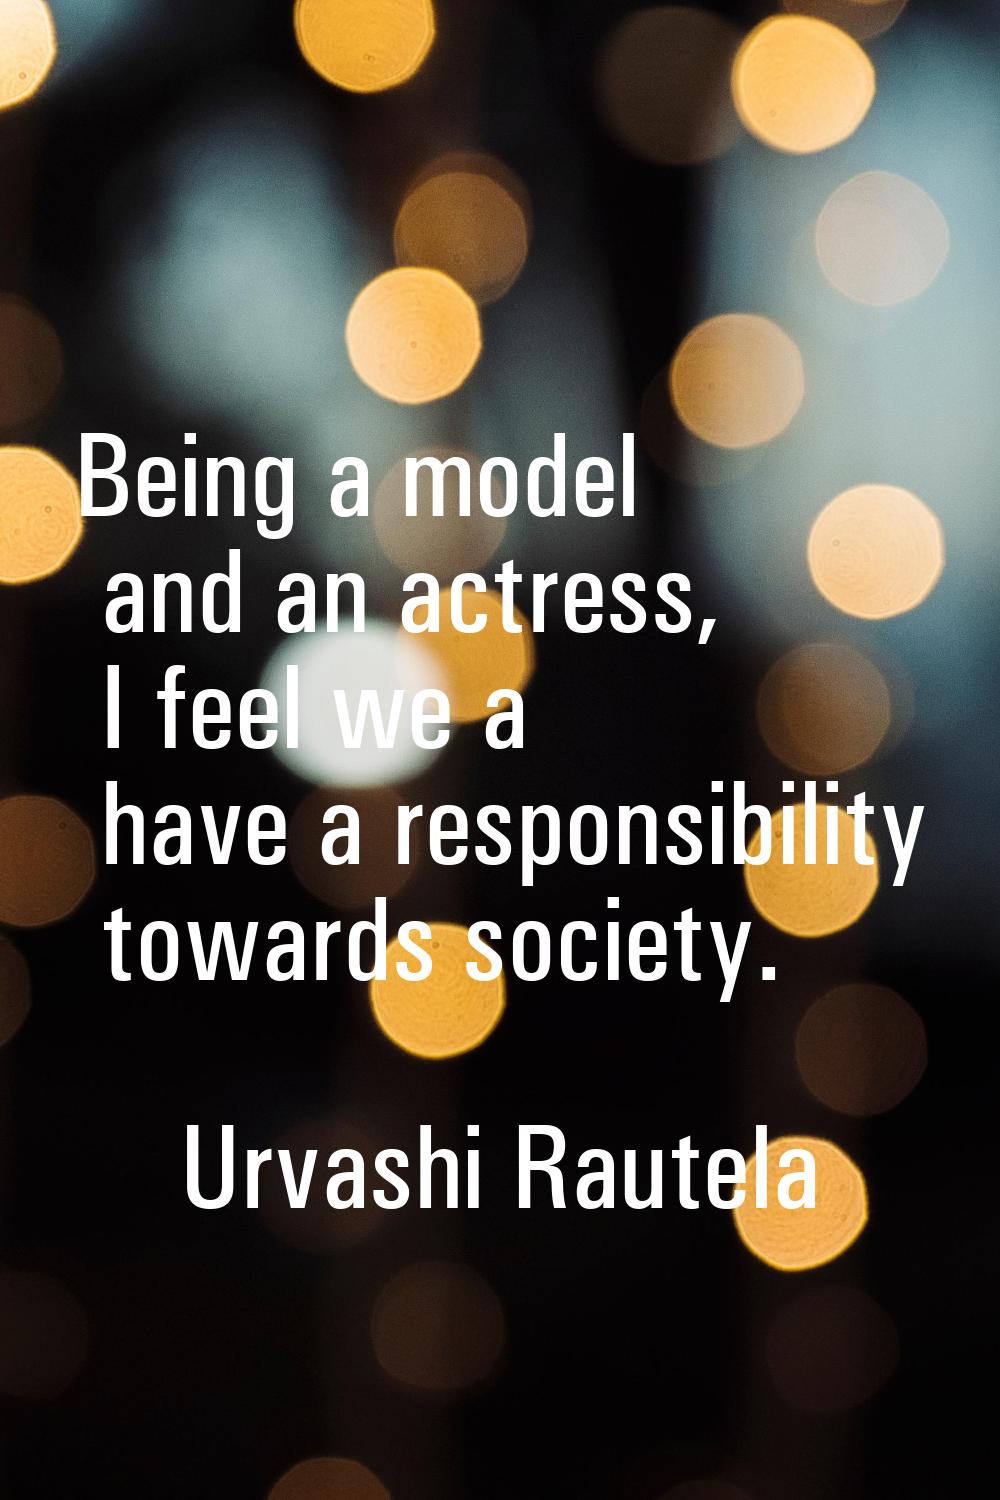 Being a model and an actress, I feel we a have a responsibility towards society.